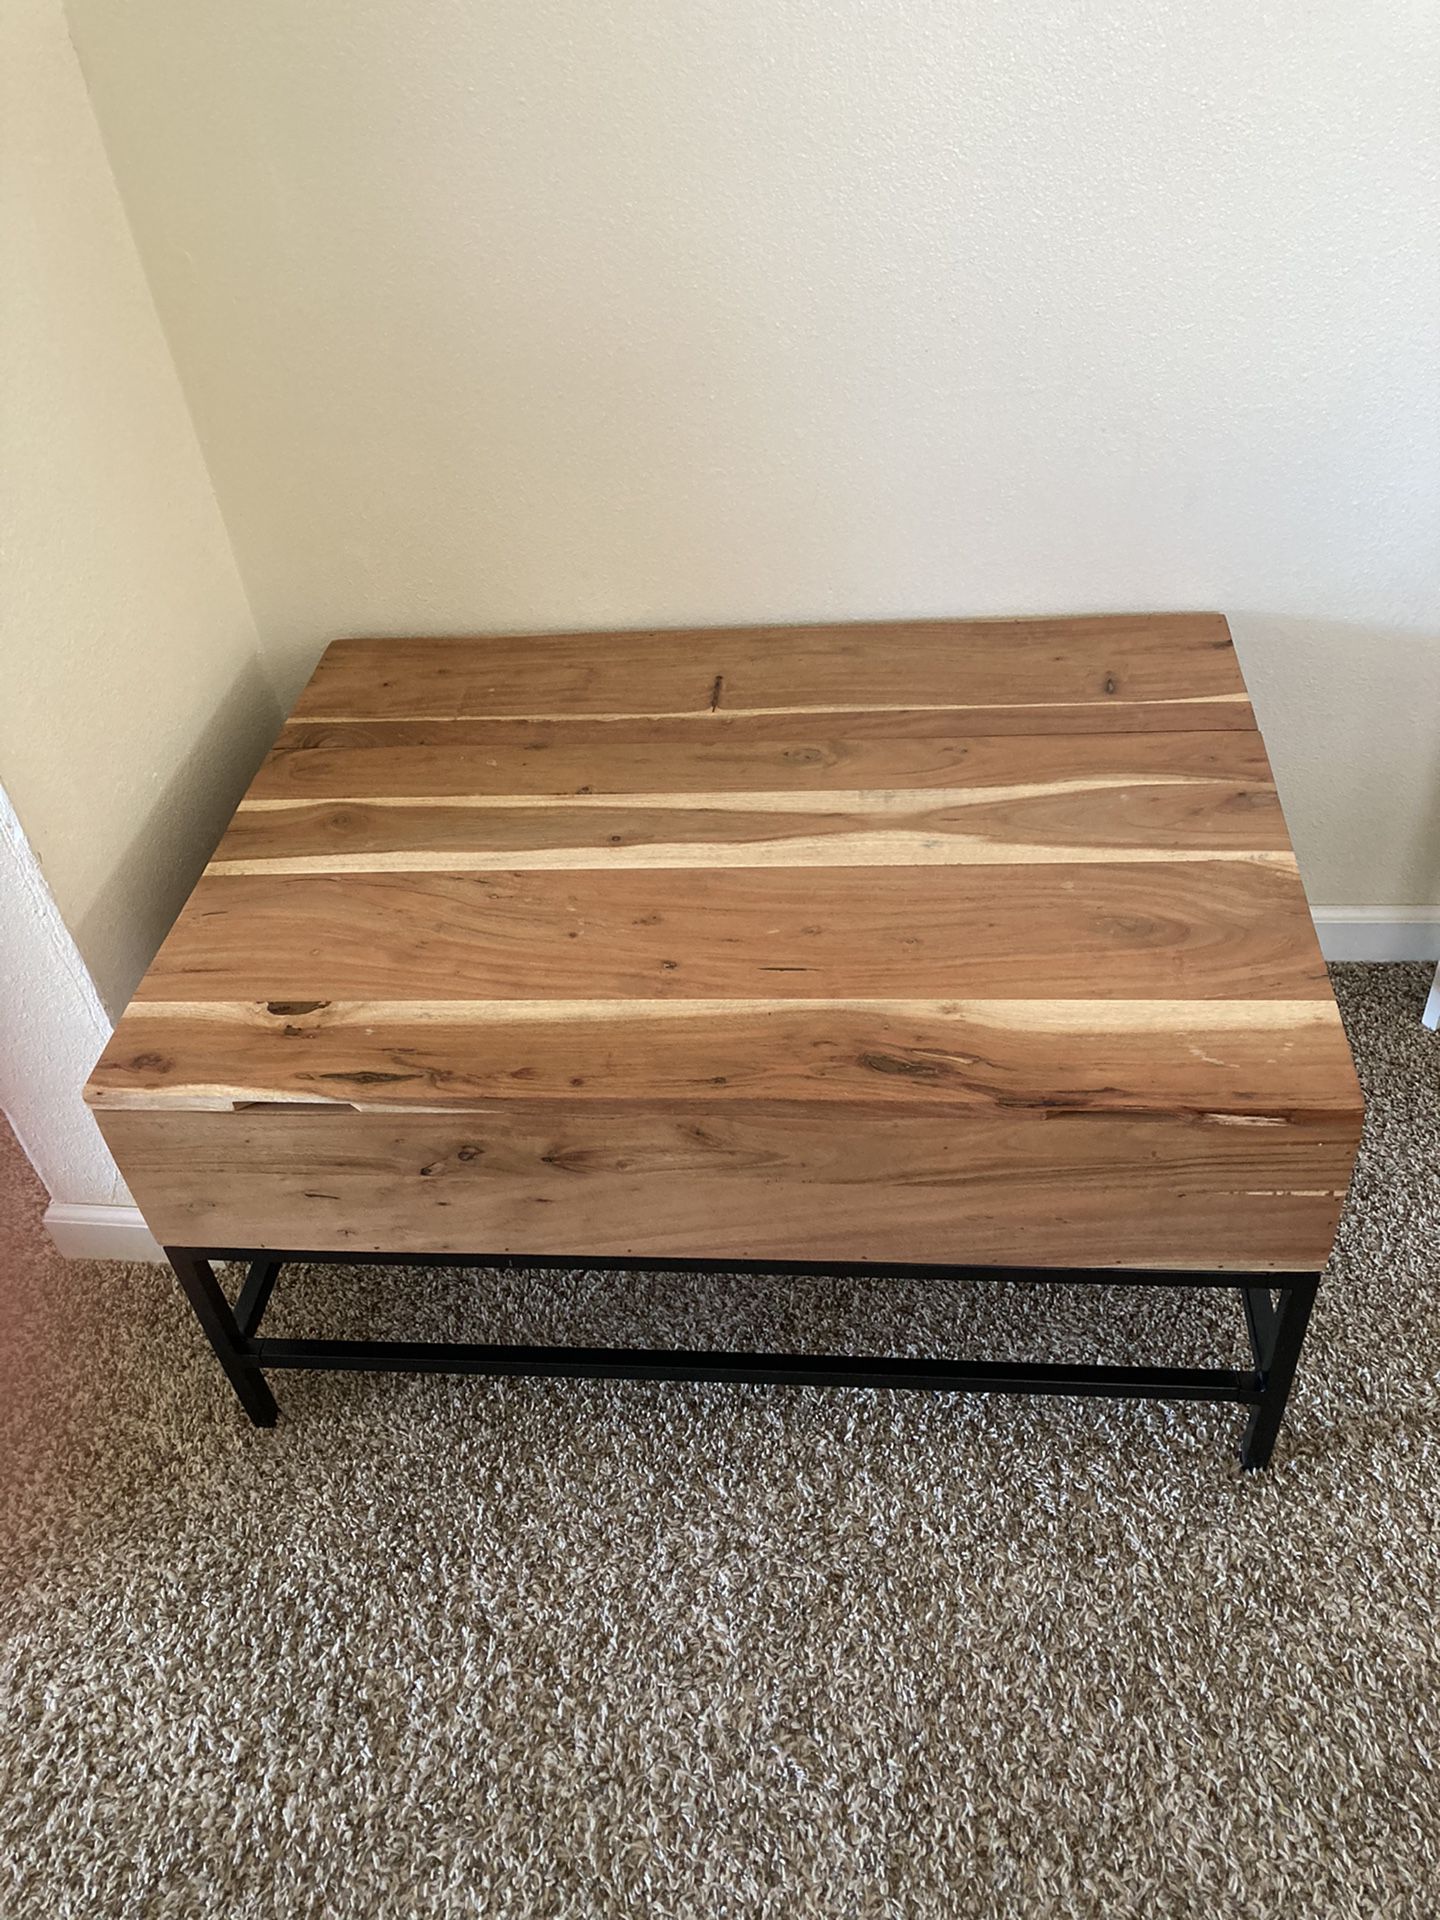 Wood Coffee Table 36X26X18 (paid $500 2 months ago)